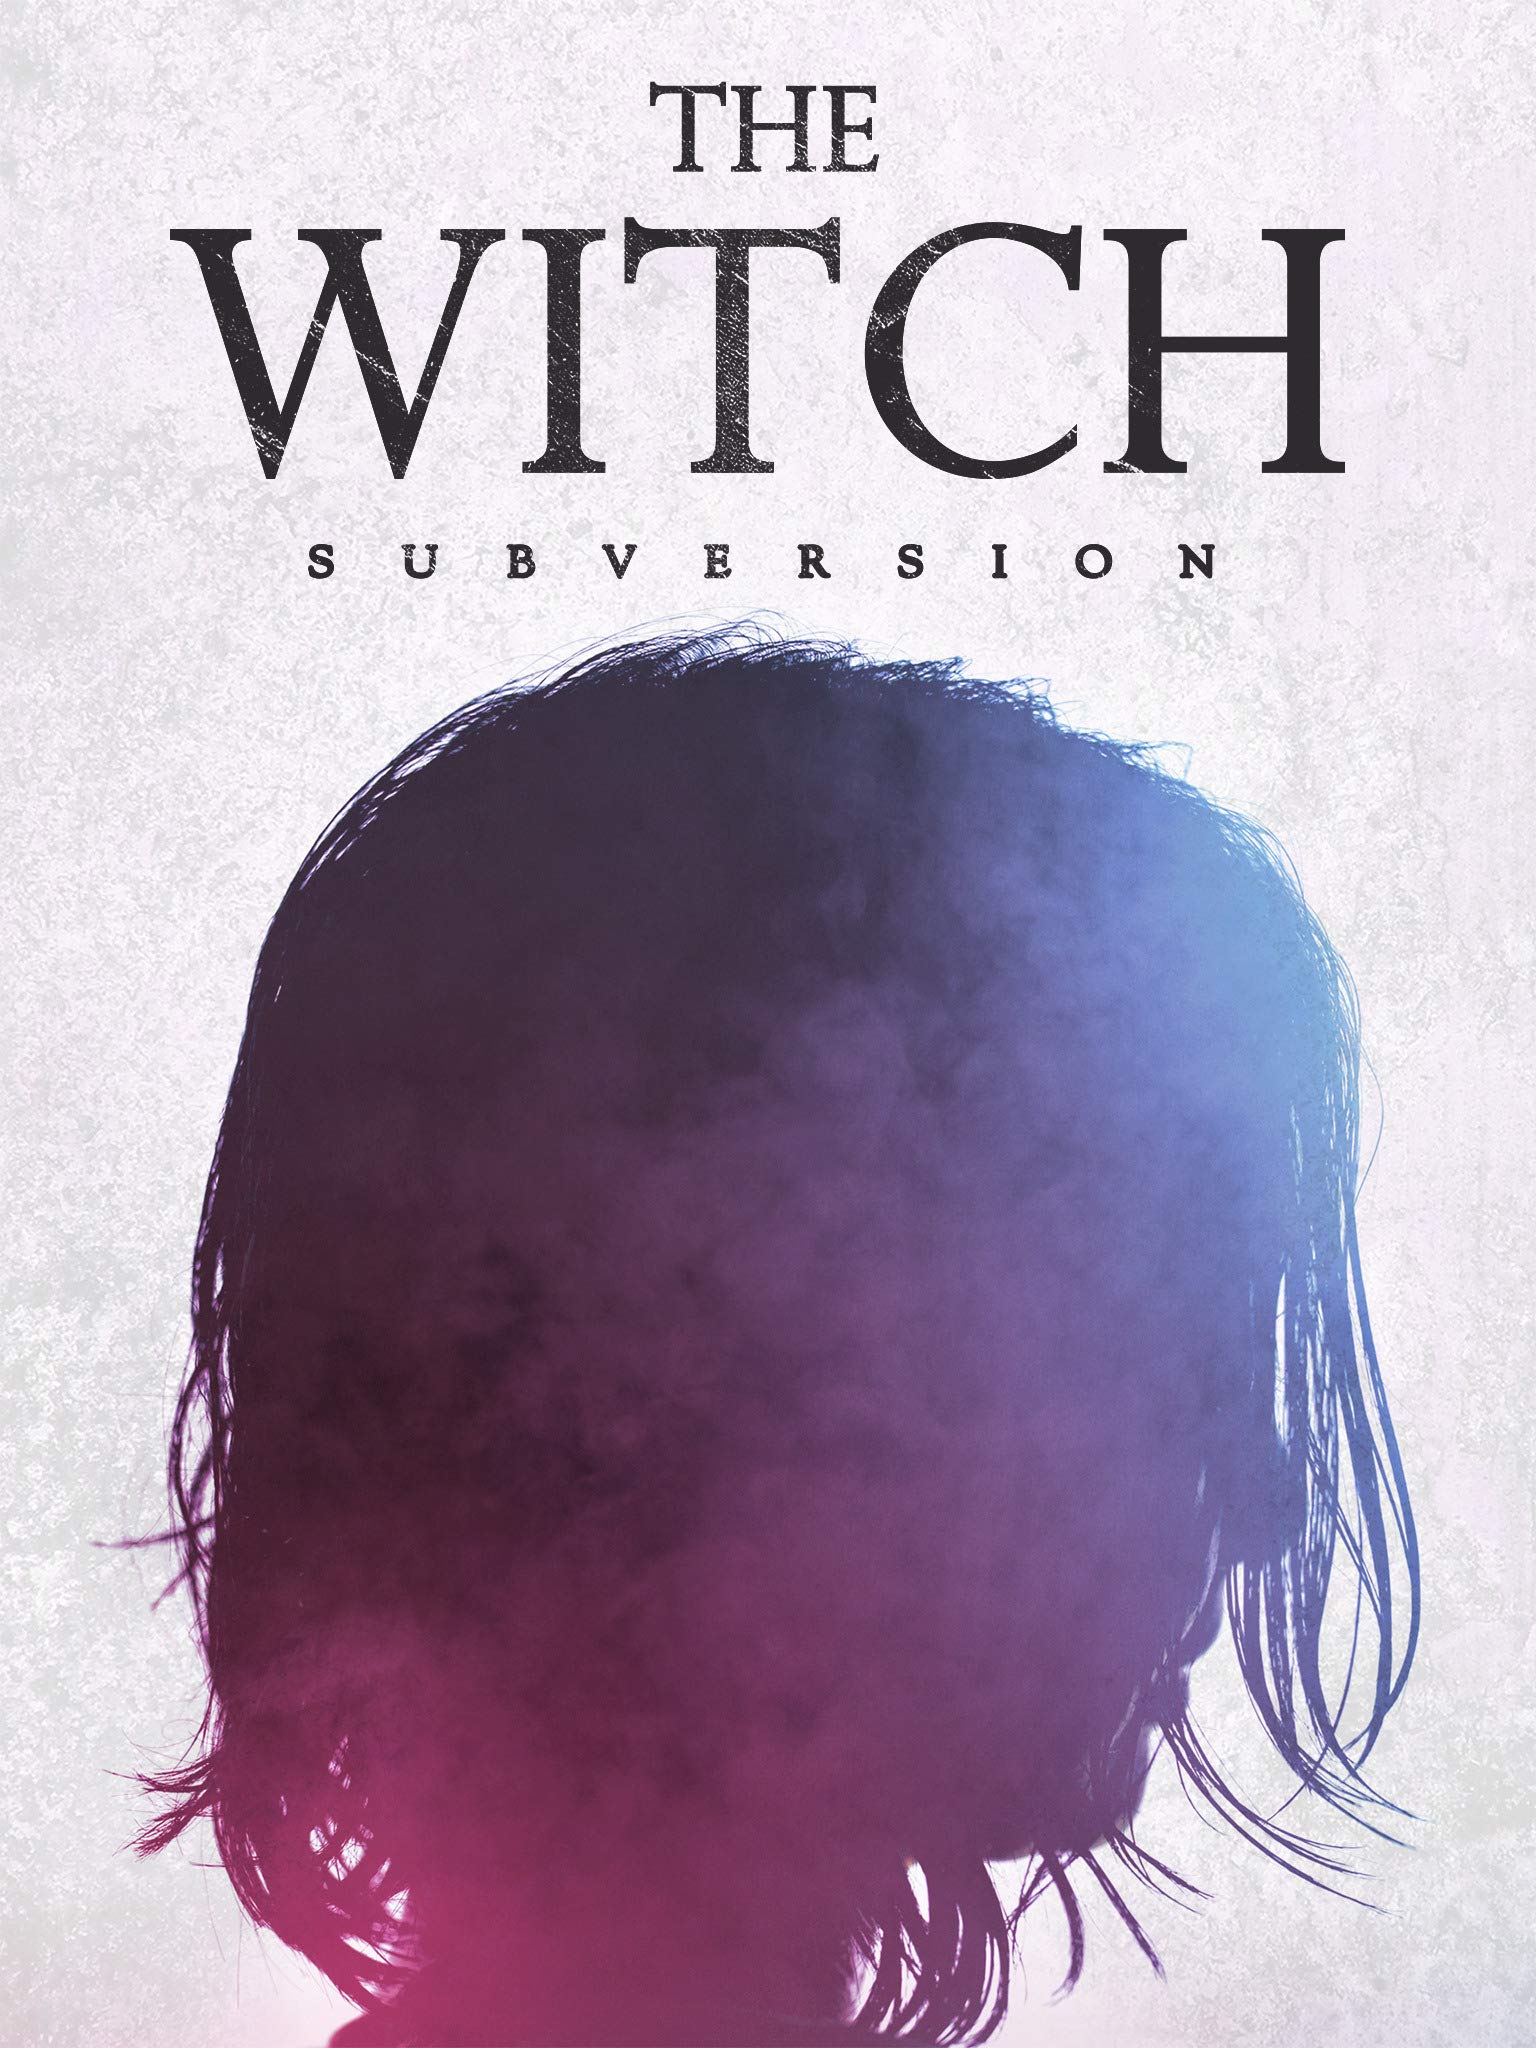 the witch part 1. the subversion watch